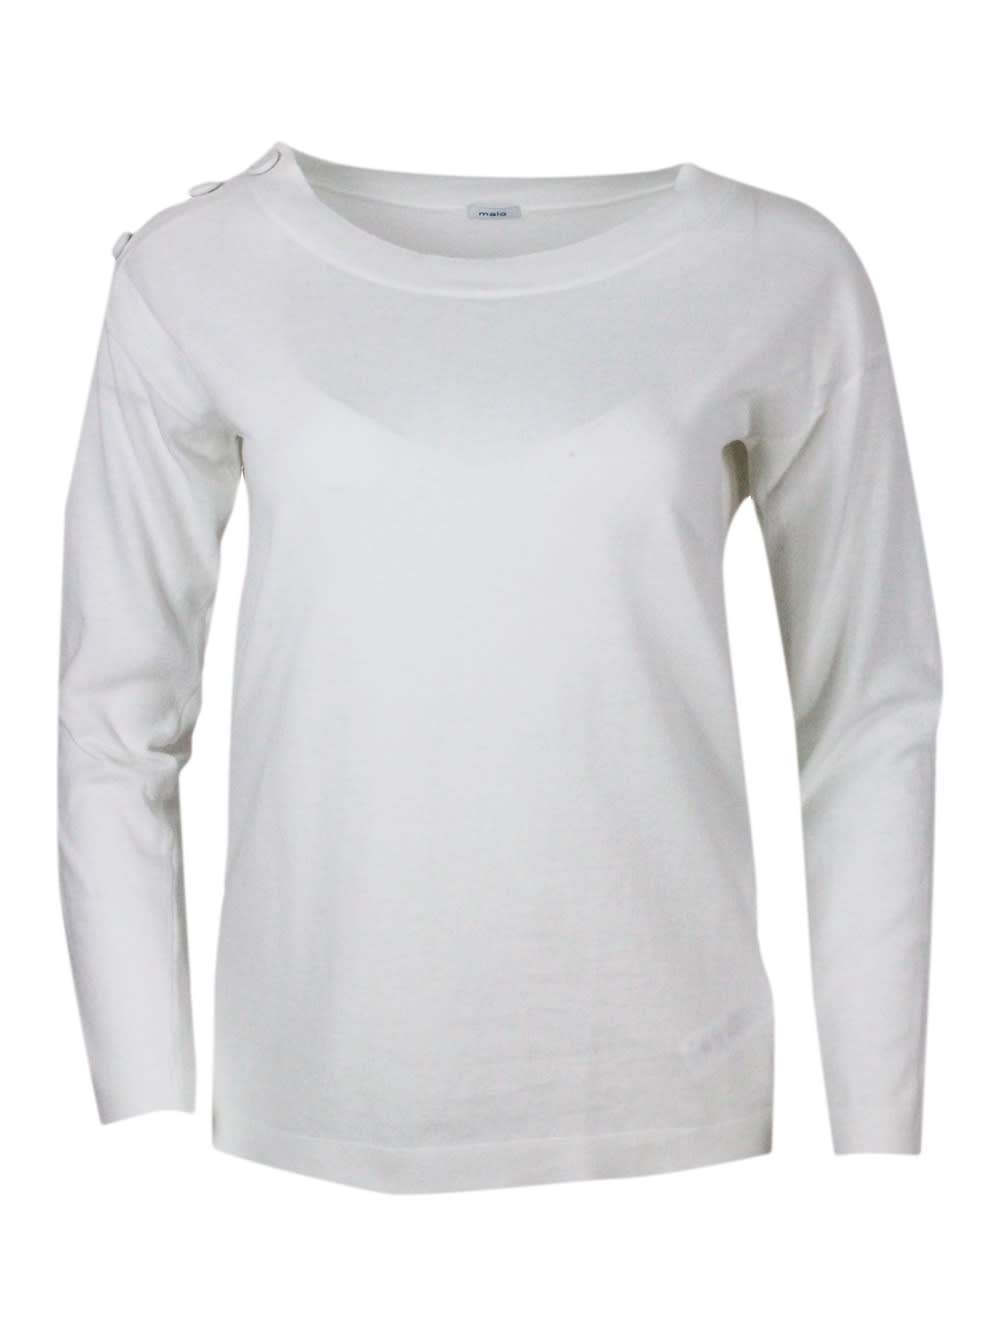 Crew-neck, Long-sleeved Shirt In Cotton Thread With Buttons On The Shoulder